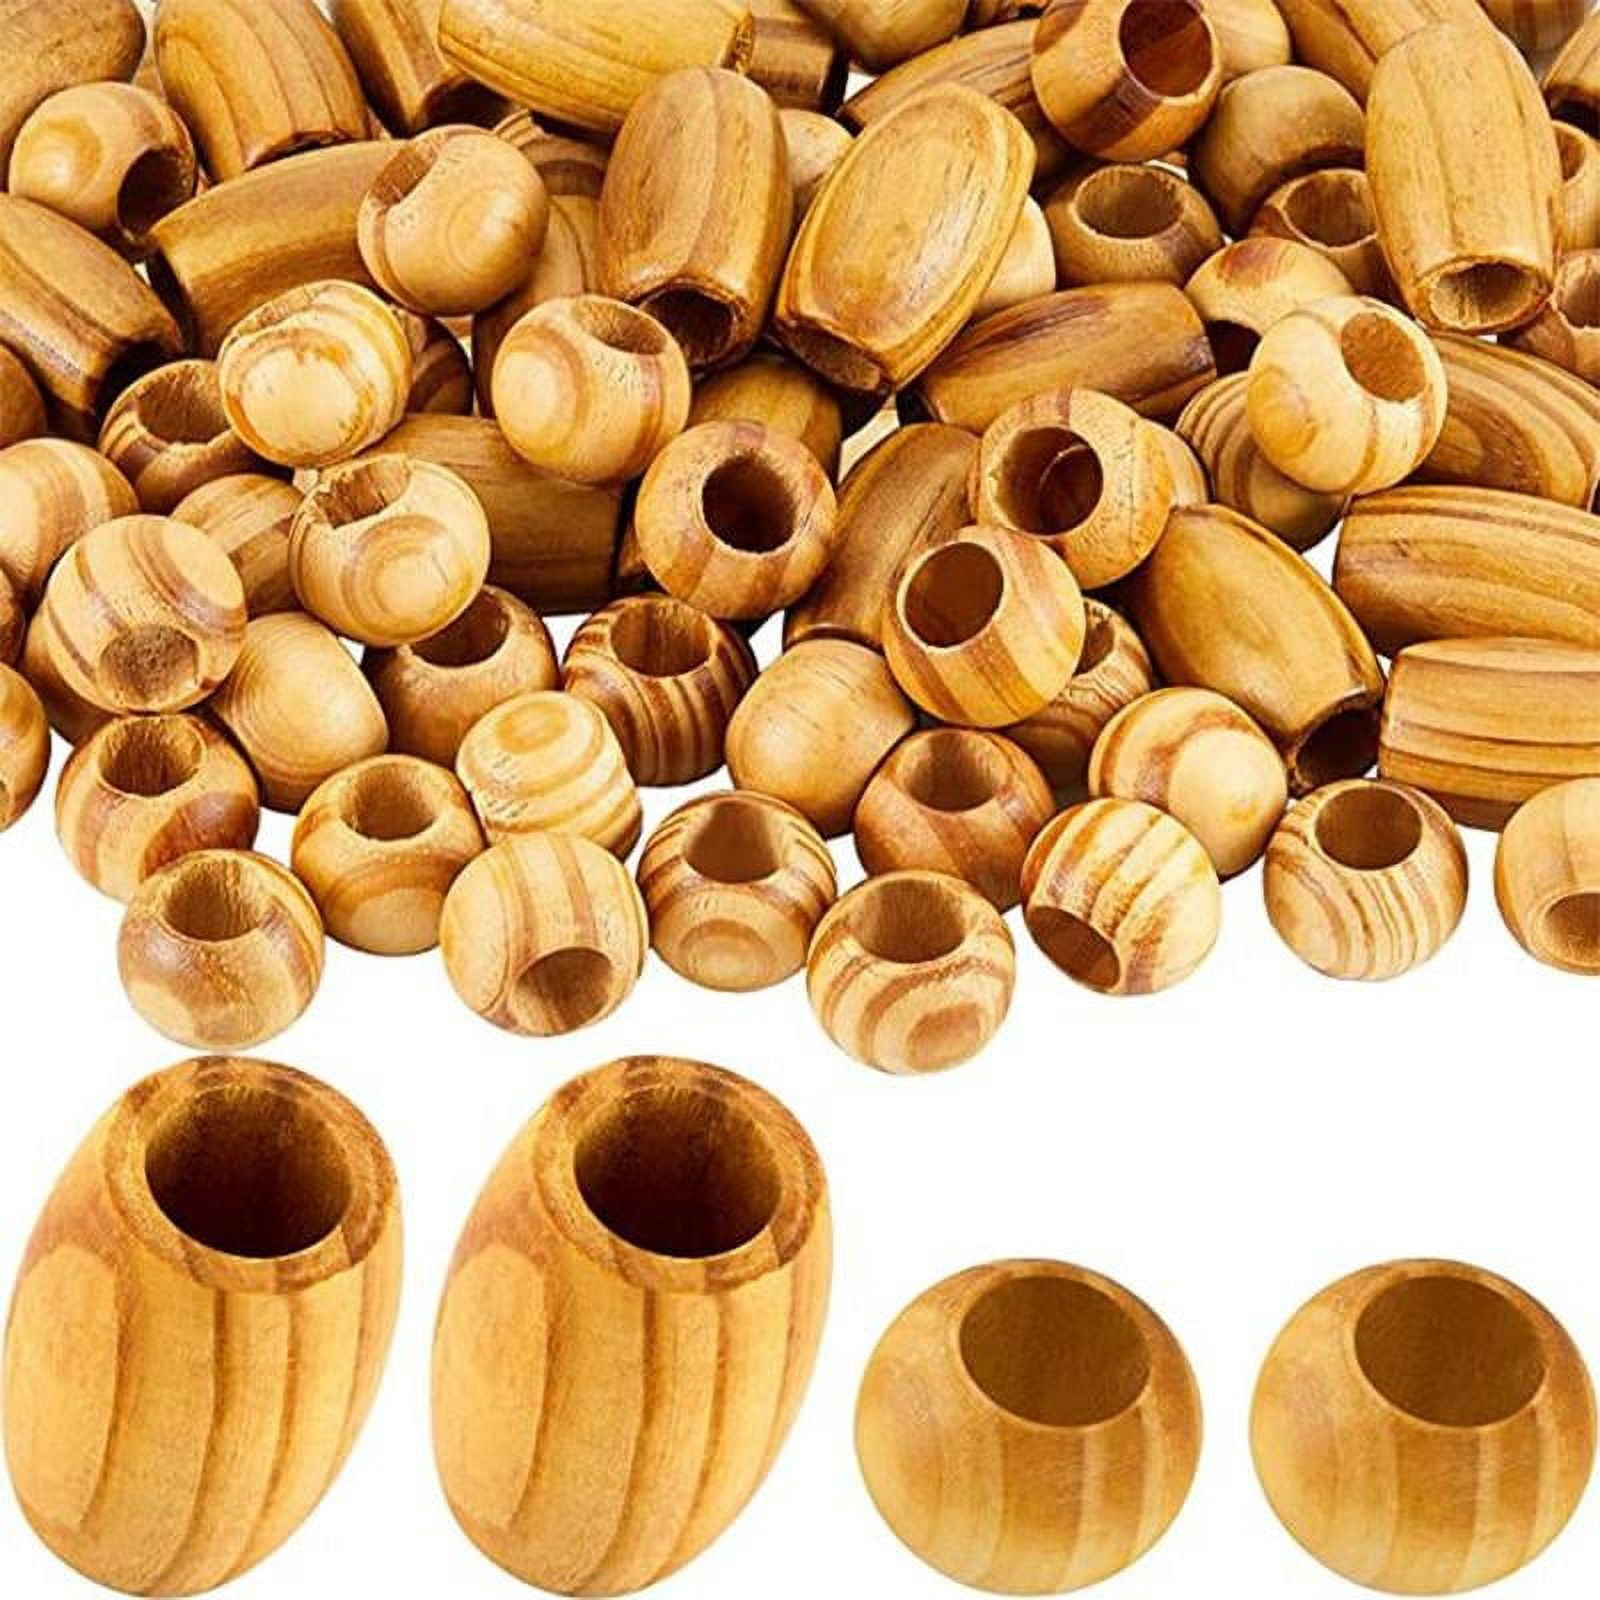  50 Pieces 3/4 Inch Blue Wood Beads Large Hole Wooden Macrame  Beads for Macrame Crafts, Wood Beads Bulk with 10mm Hole for Garlands Home  Decor : Arts, Crafts & Sewing